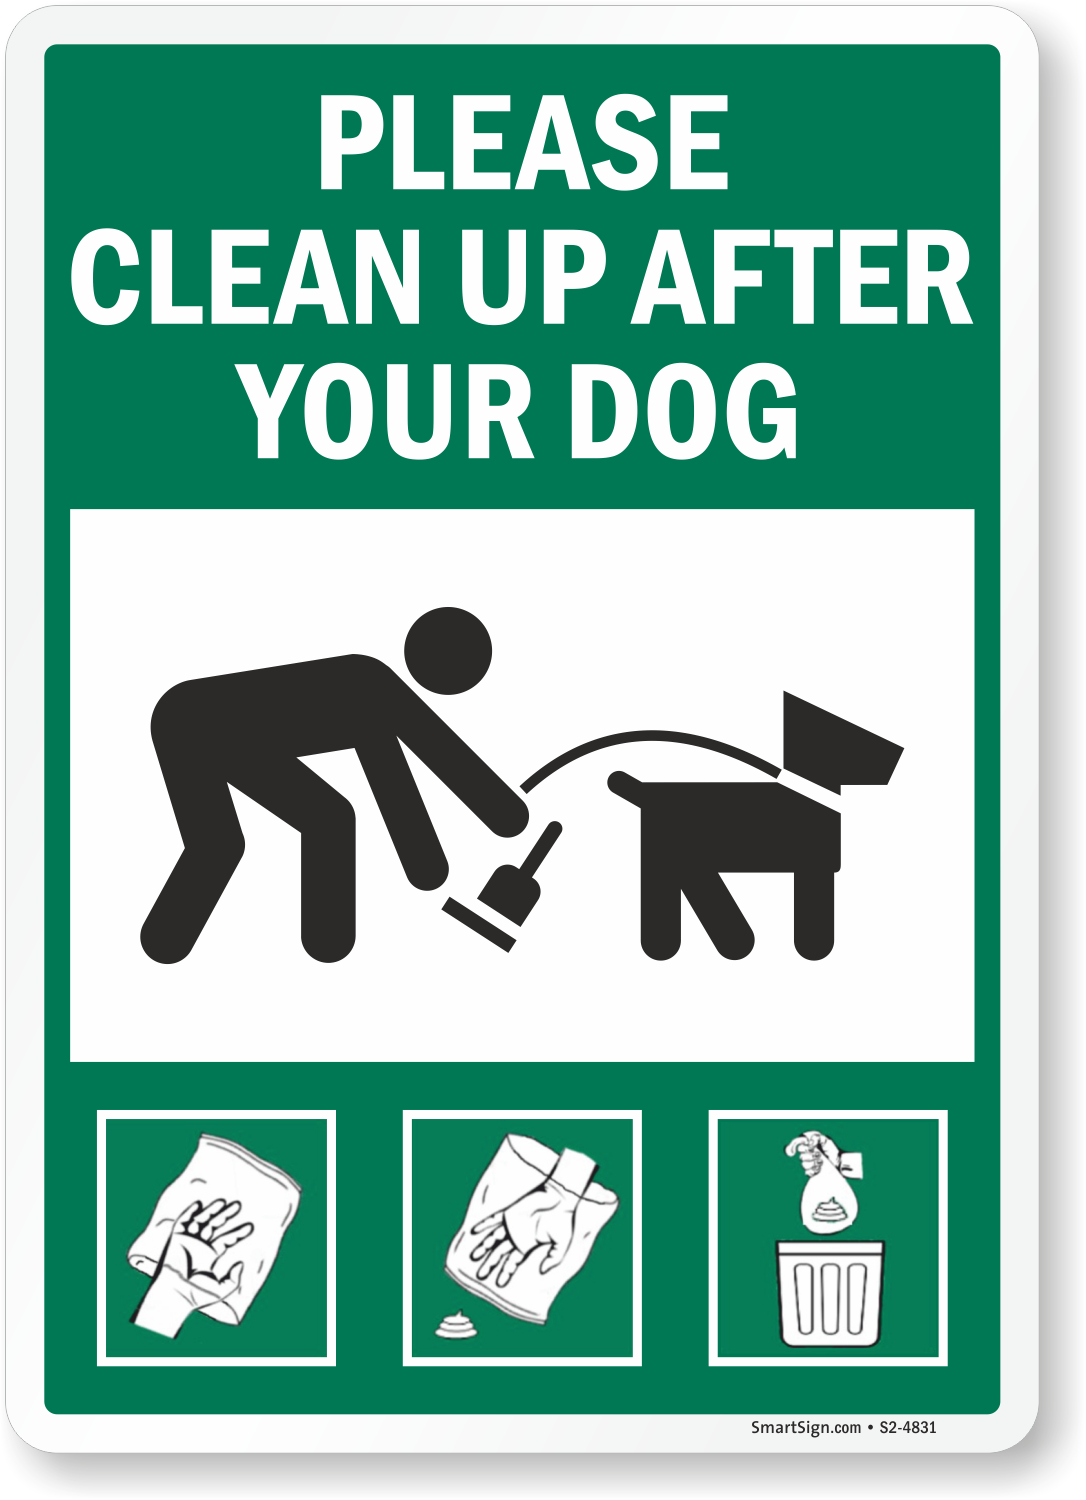 Please Curb and Pick up After Your Dog Sign Aluminum Sign 6 X 11 This is Our Home Help us Keep it Clean and Beautiful 